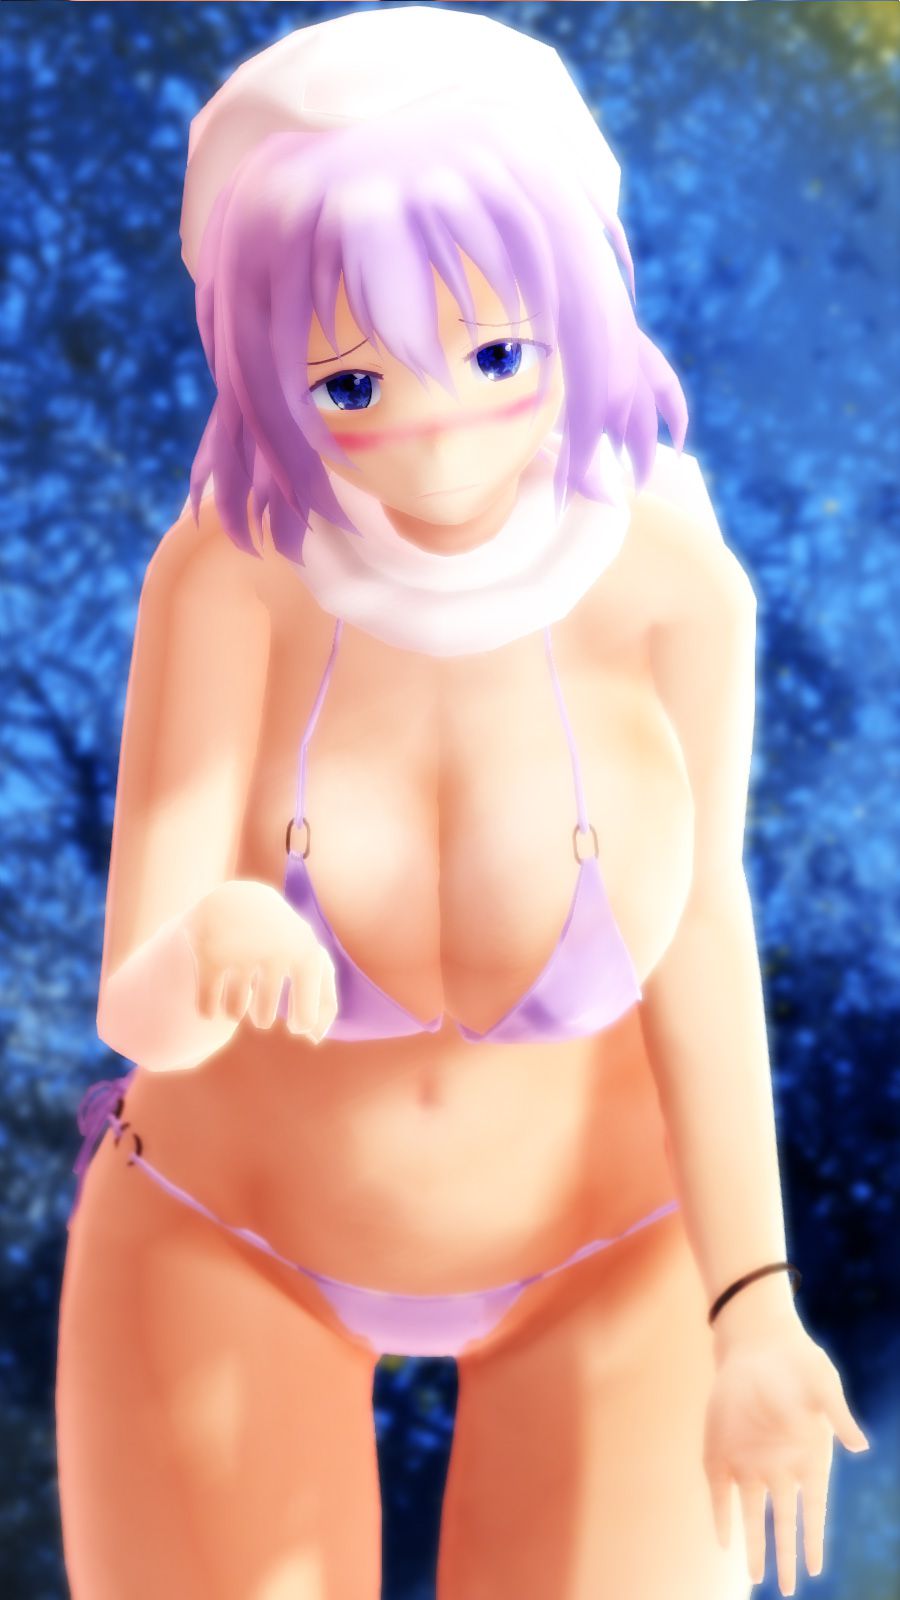 3D erotic images made with the MMD (MikuMikuDance) 4 50 50